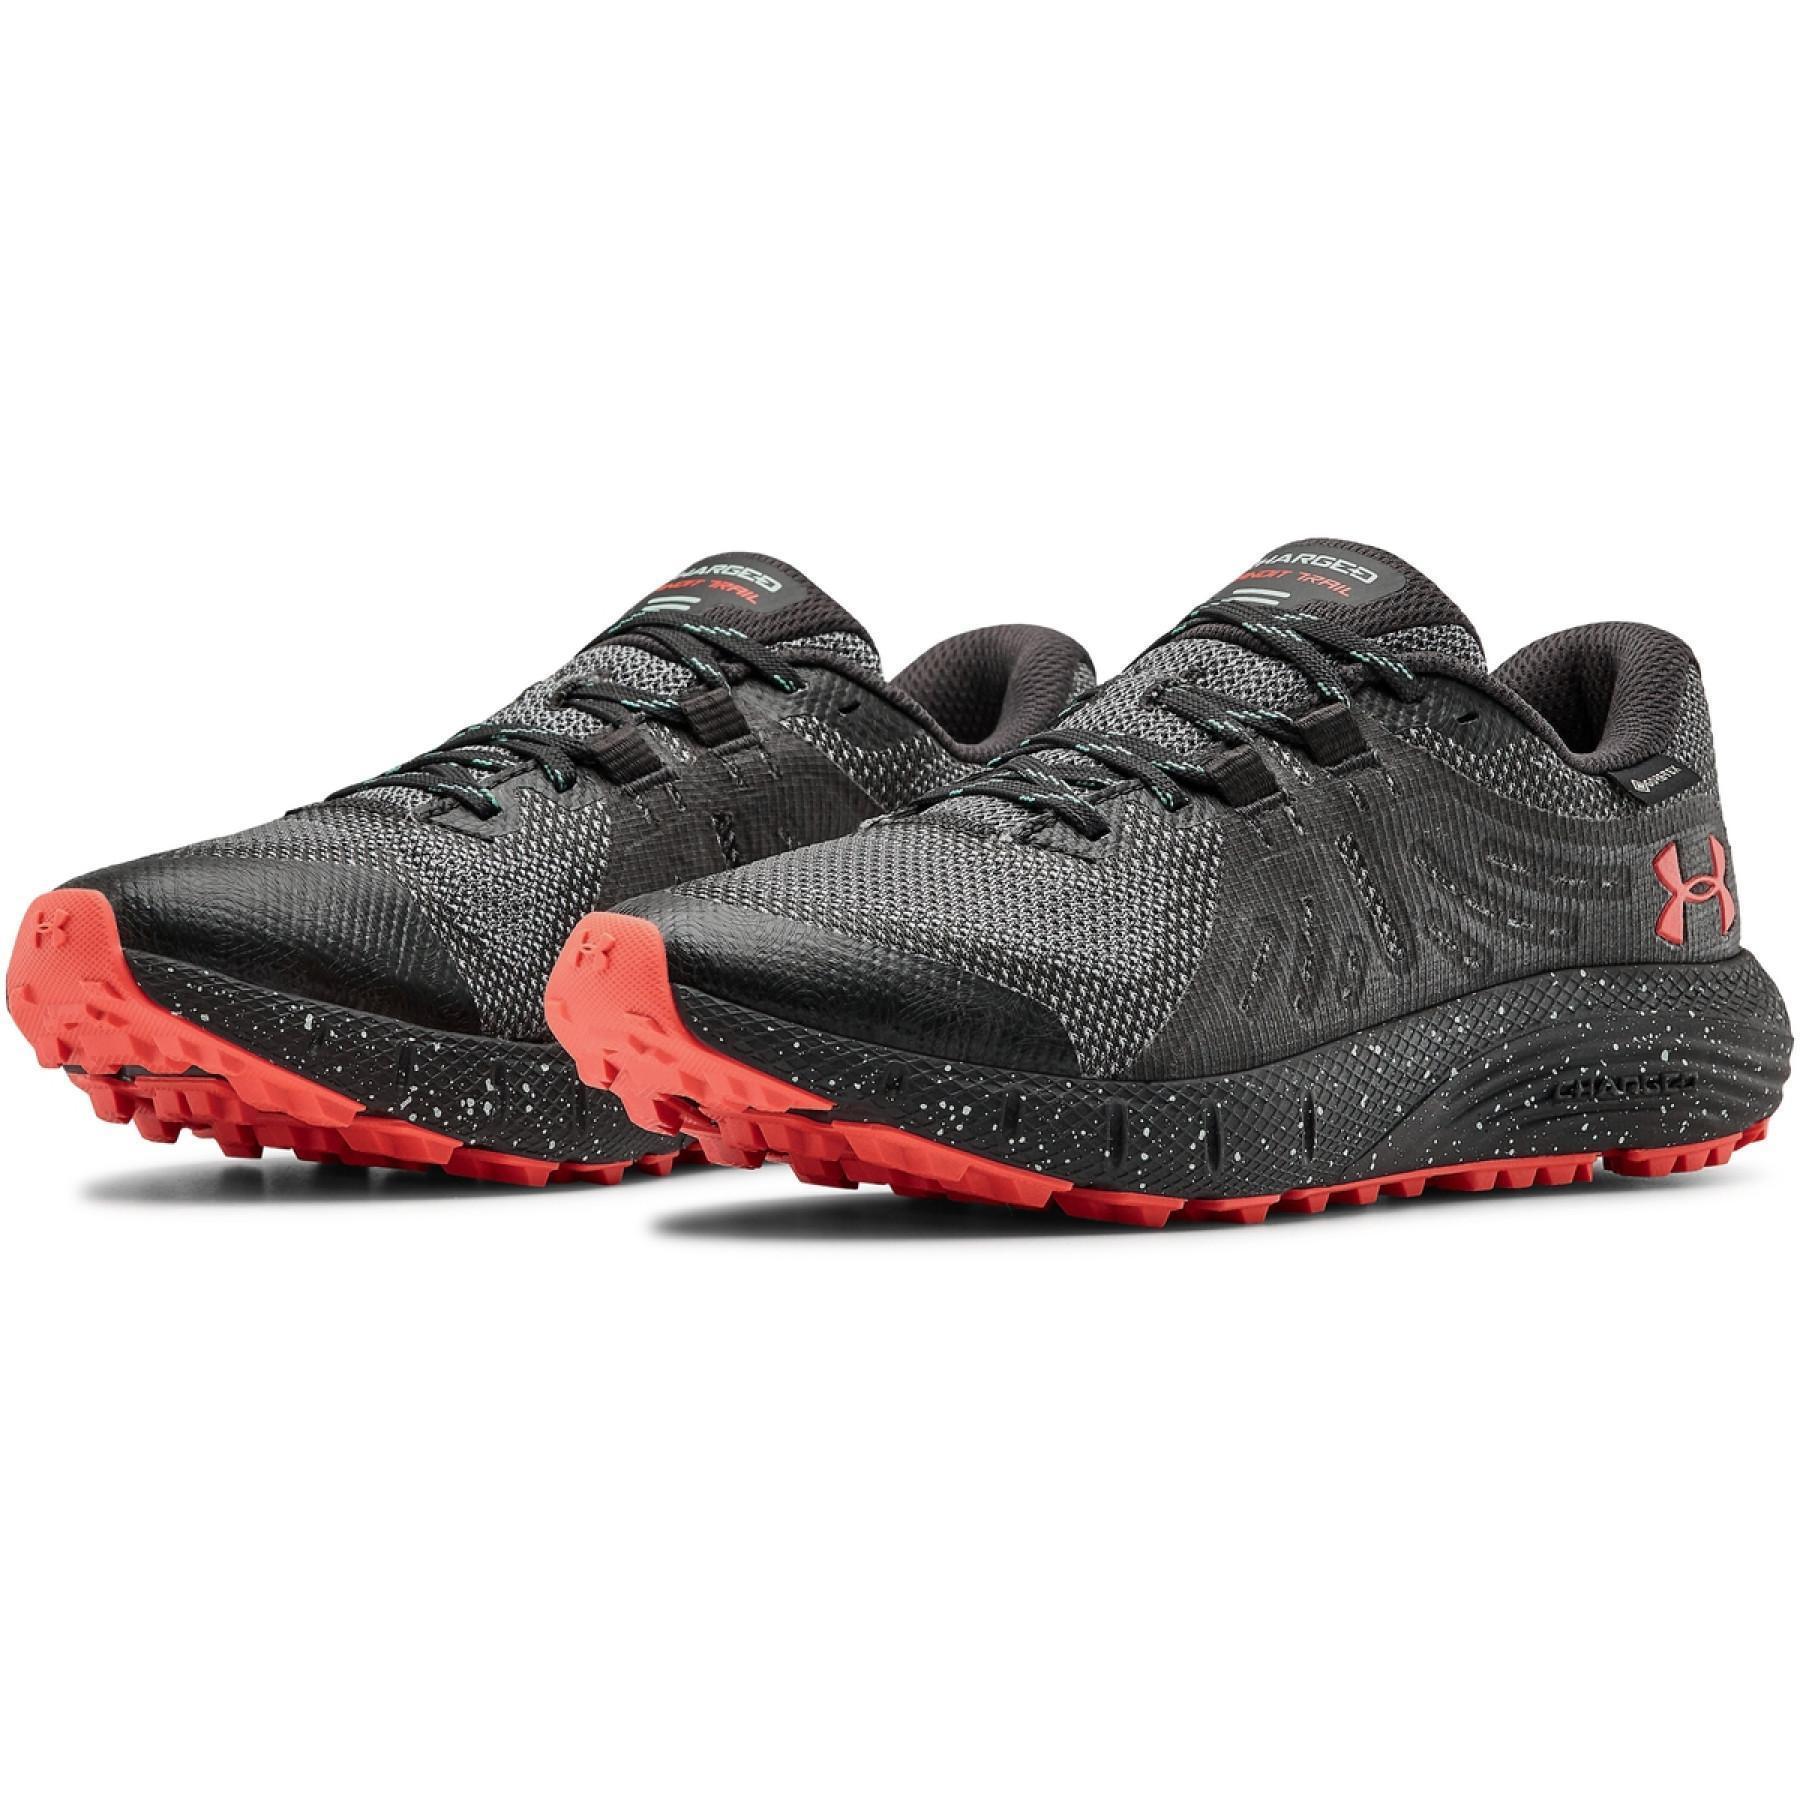 Women's running shoes Under Armour Charged Bandit Trail Gore-Tex